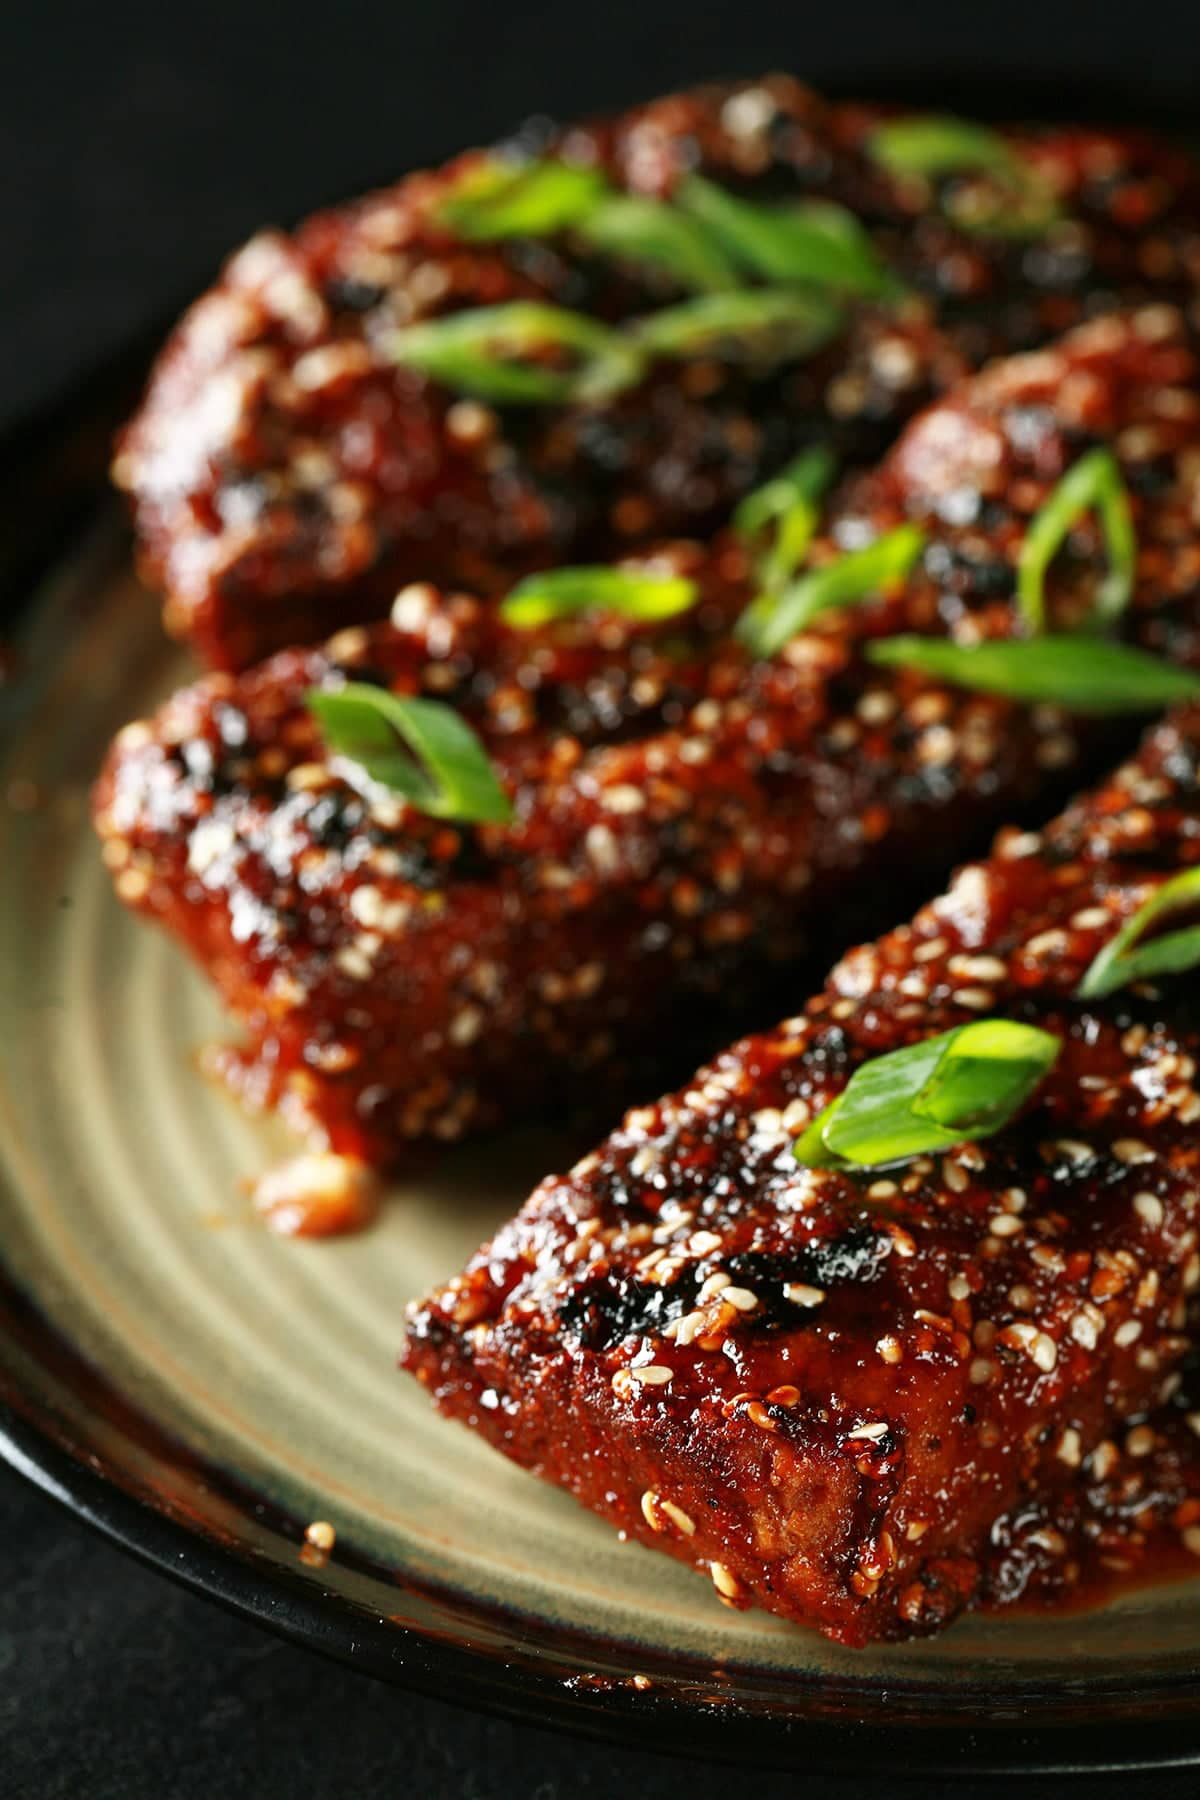 Close up photo of a plate of vegetarian boneless ribs. They're covered in a red-brown sauce, sesame seeds, and sliced green onion.